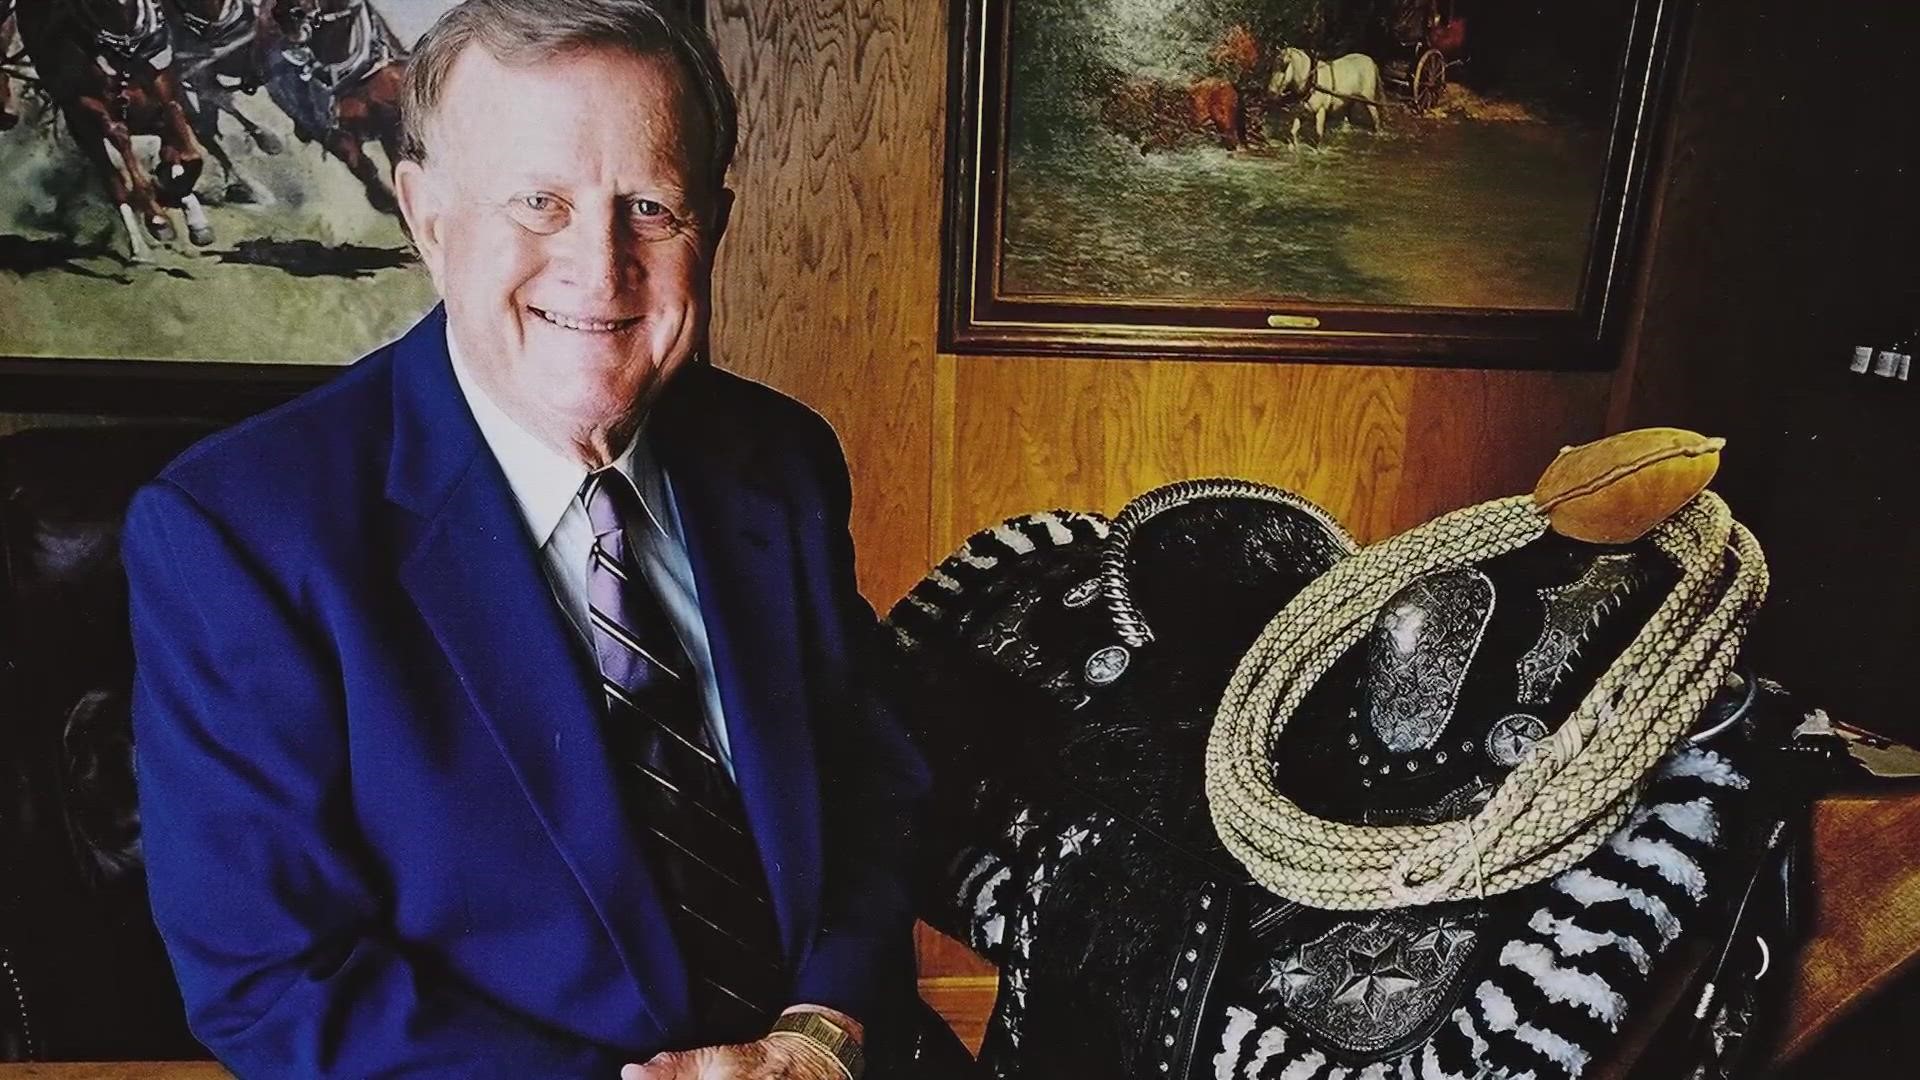 A prominent San Antonio businessman and philanthropist, Red McCombs, has died.